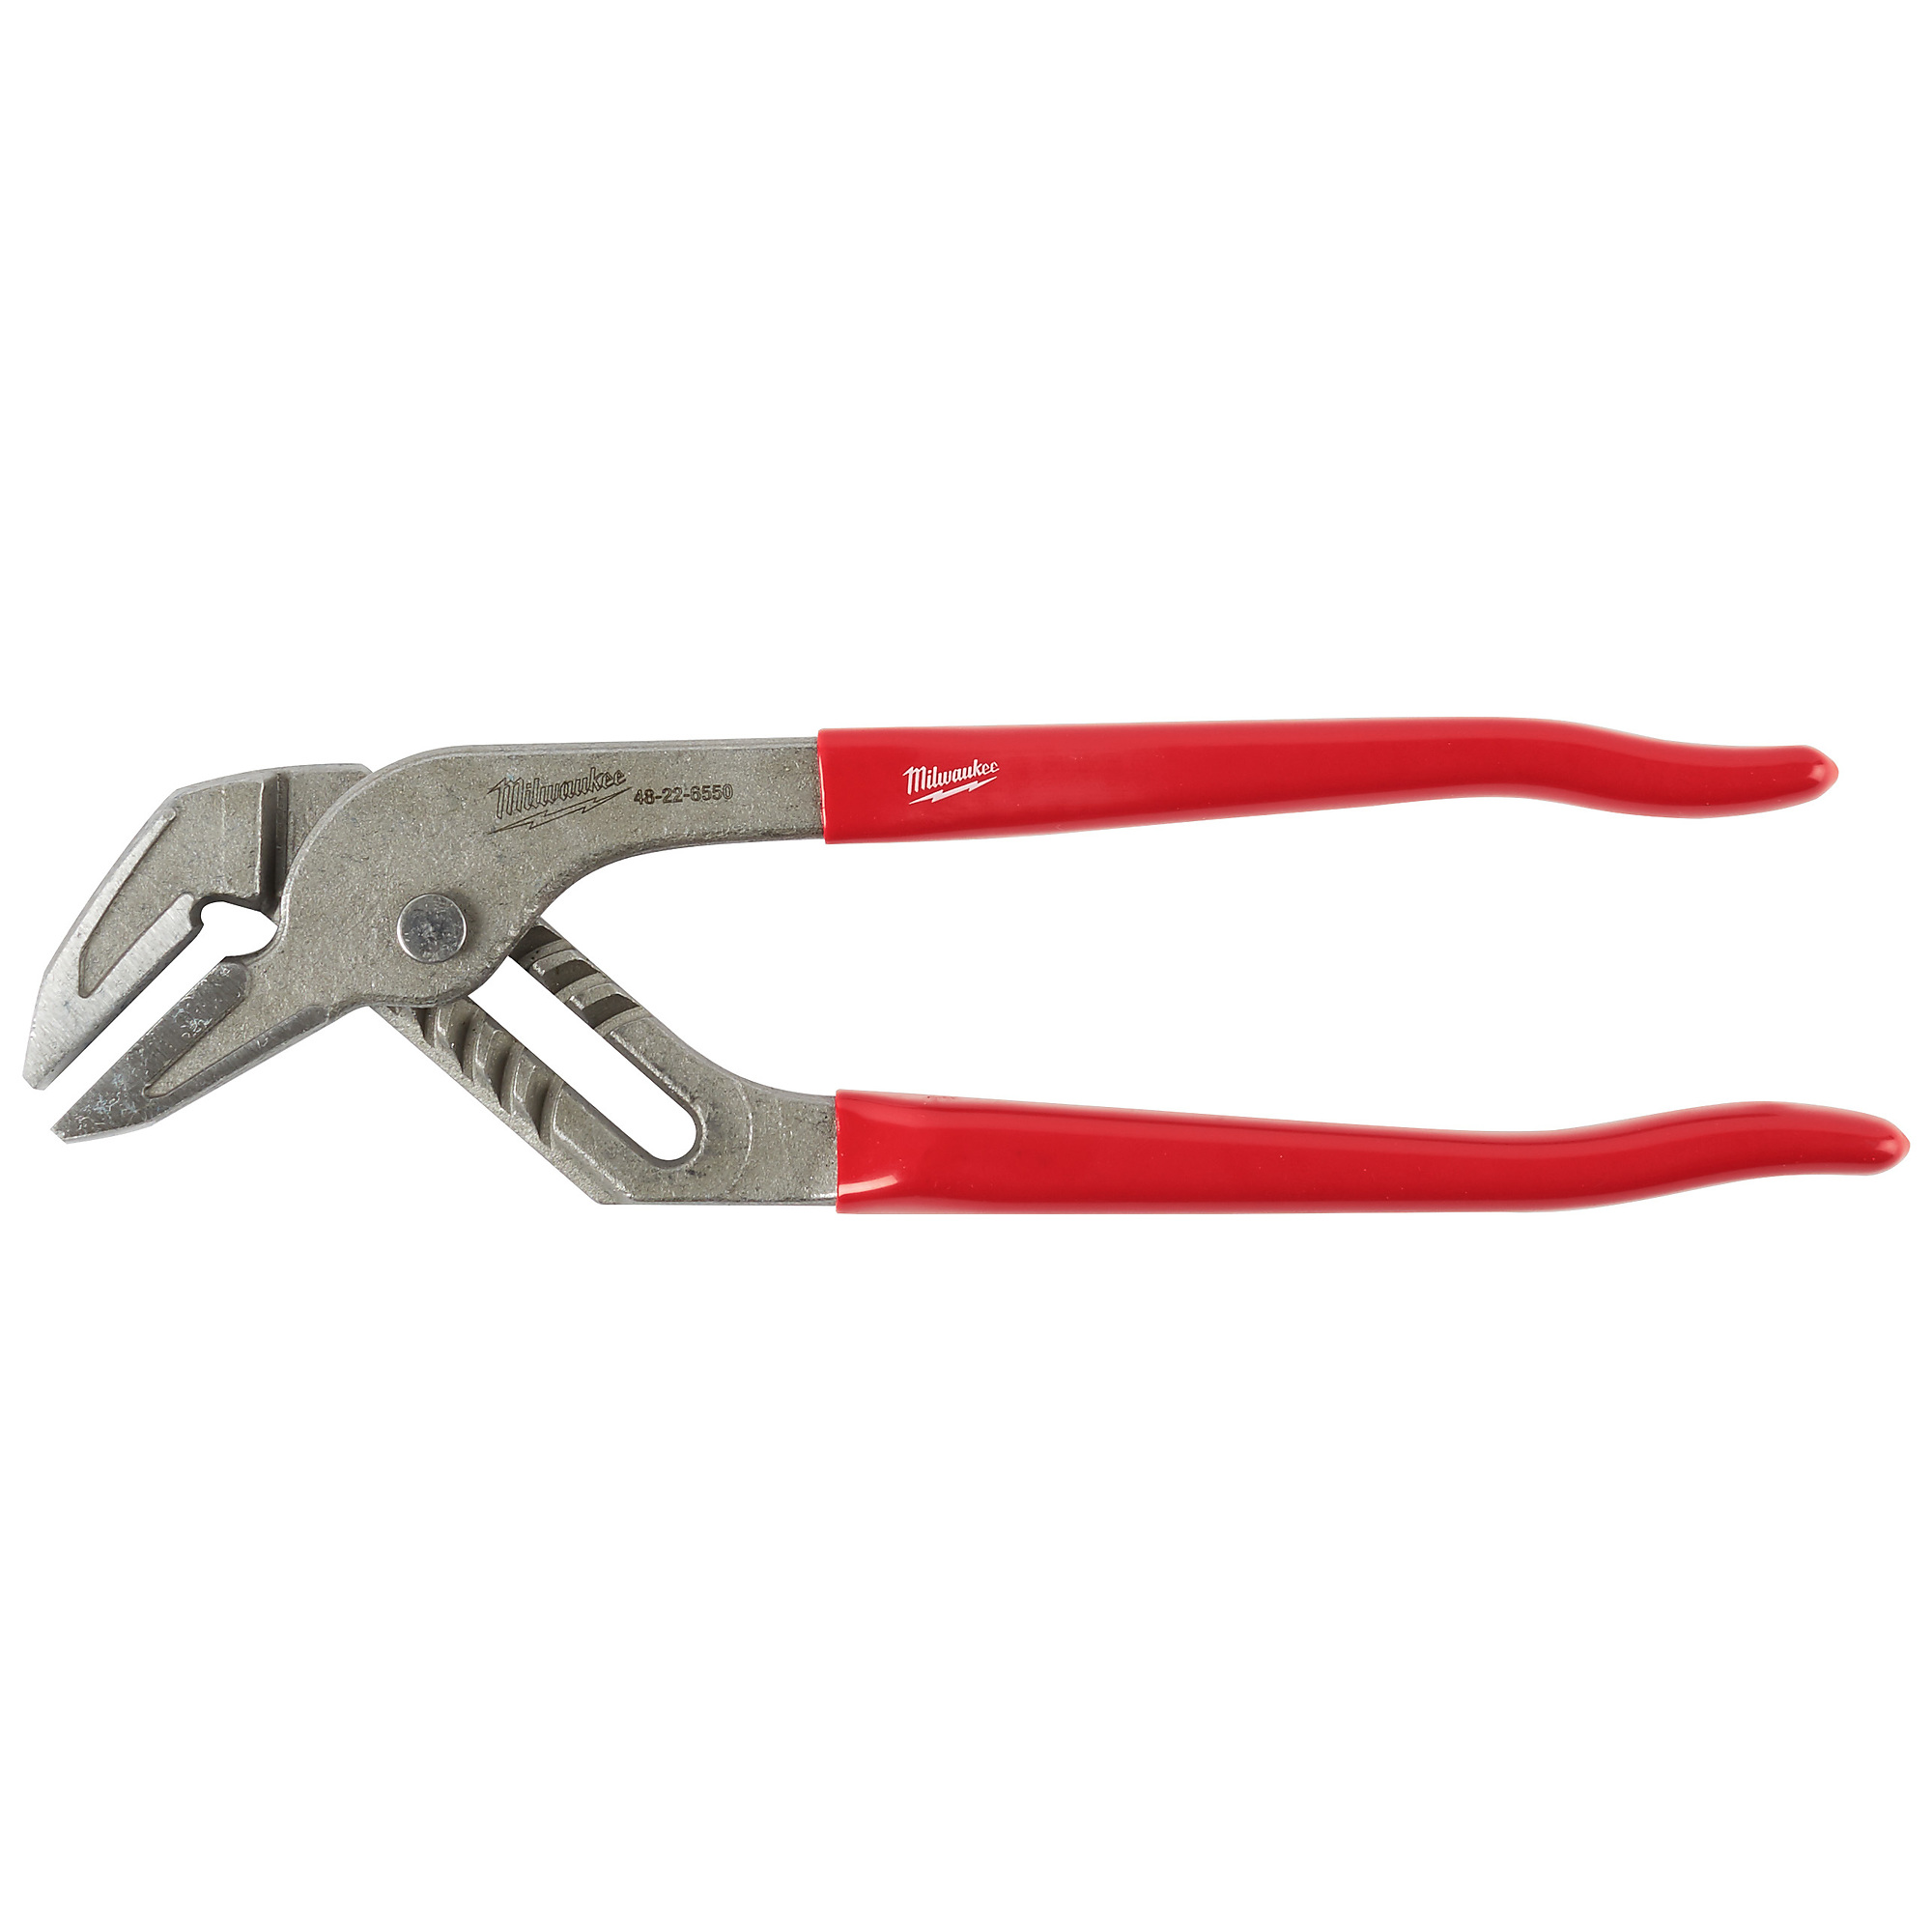 Milwaukee, 10Inch Smooth Jaw Pliers, Pieces (qty.) 1, Material Metal, Jaw Capacity 2 in, Model 48-22-6550